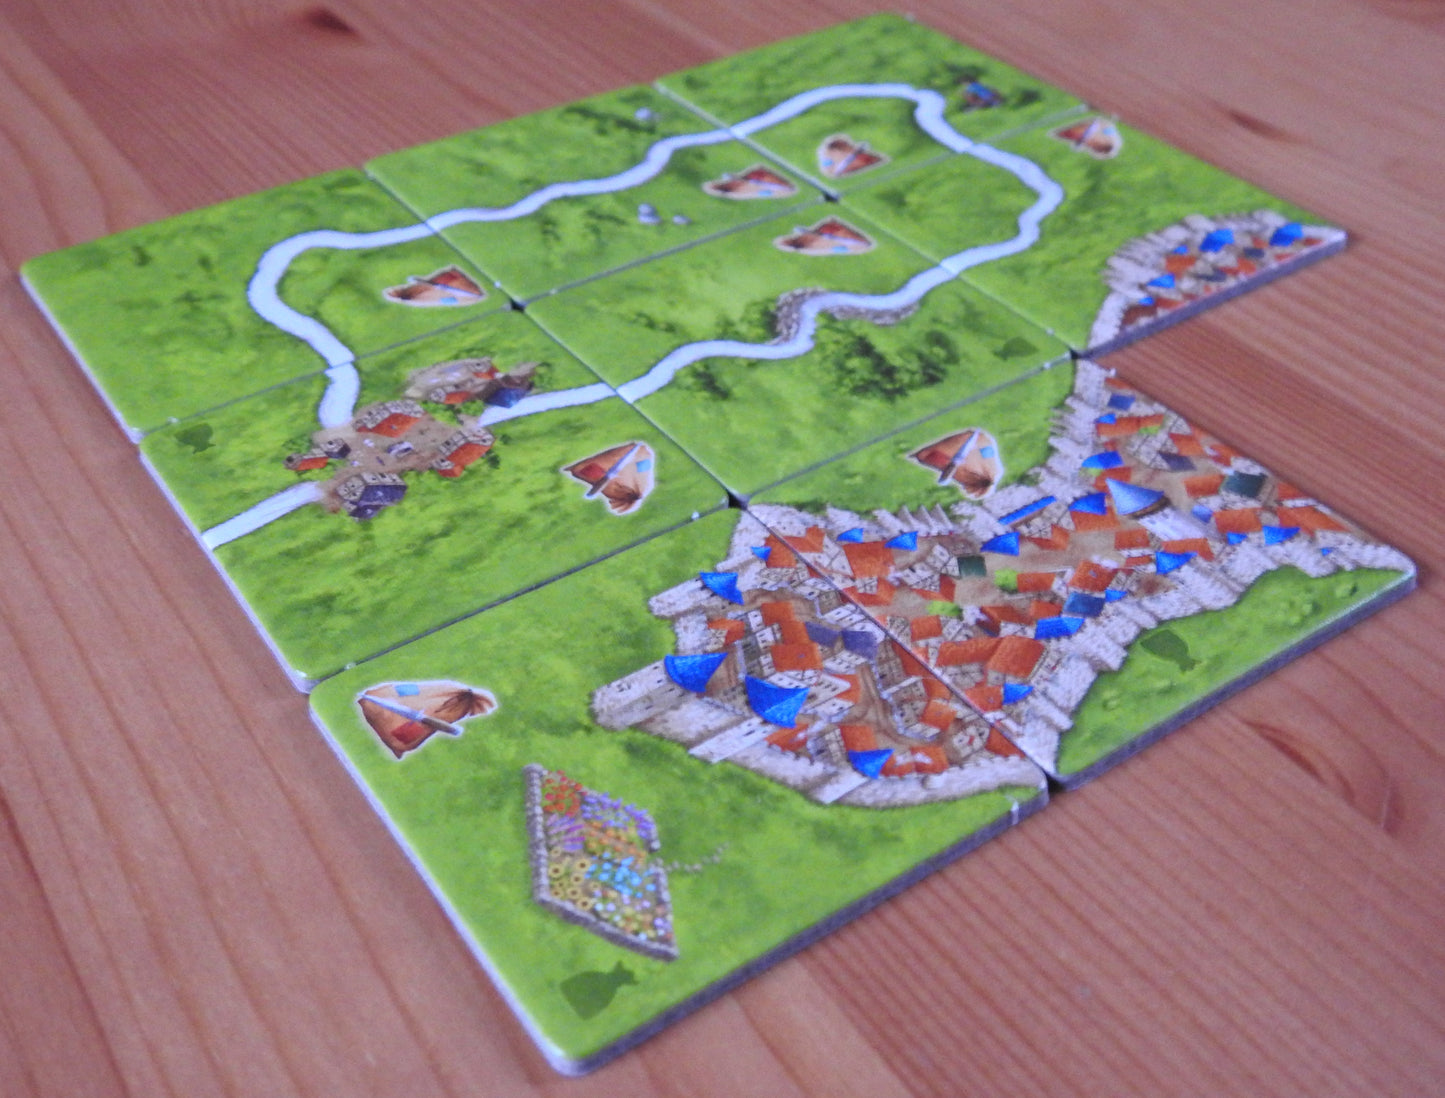 Another view showing just the 8 included landscape tiles in this Carcassonne Robbers expansion.